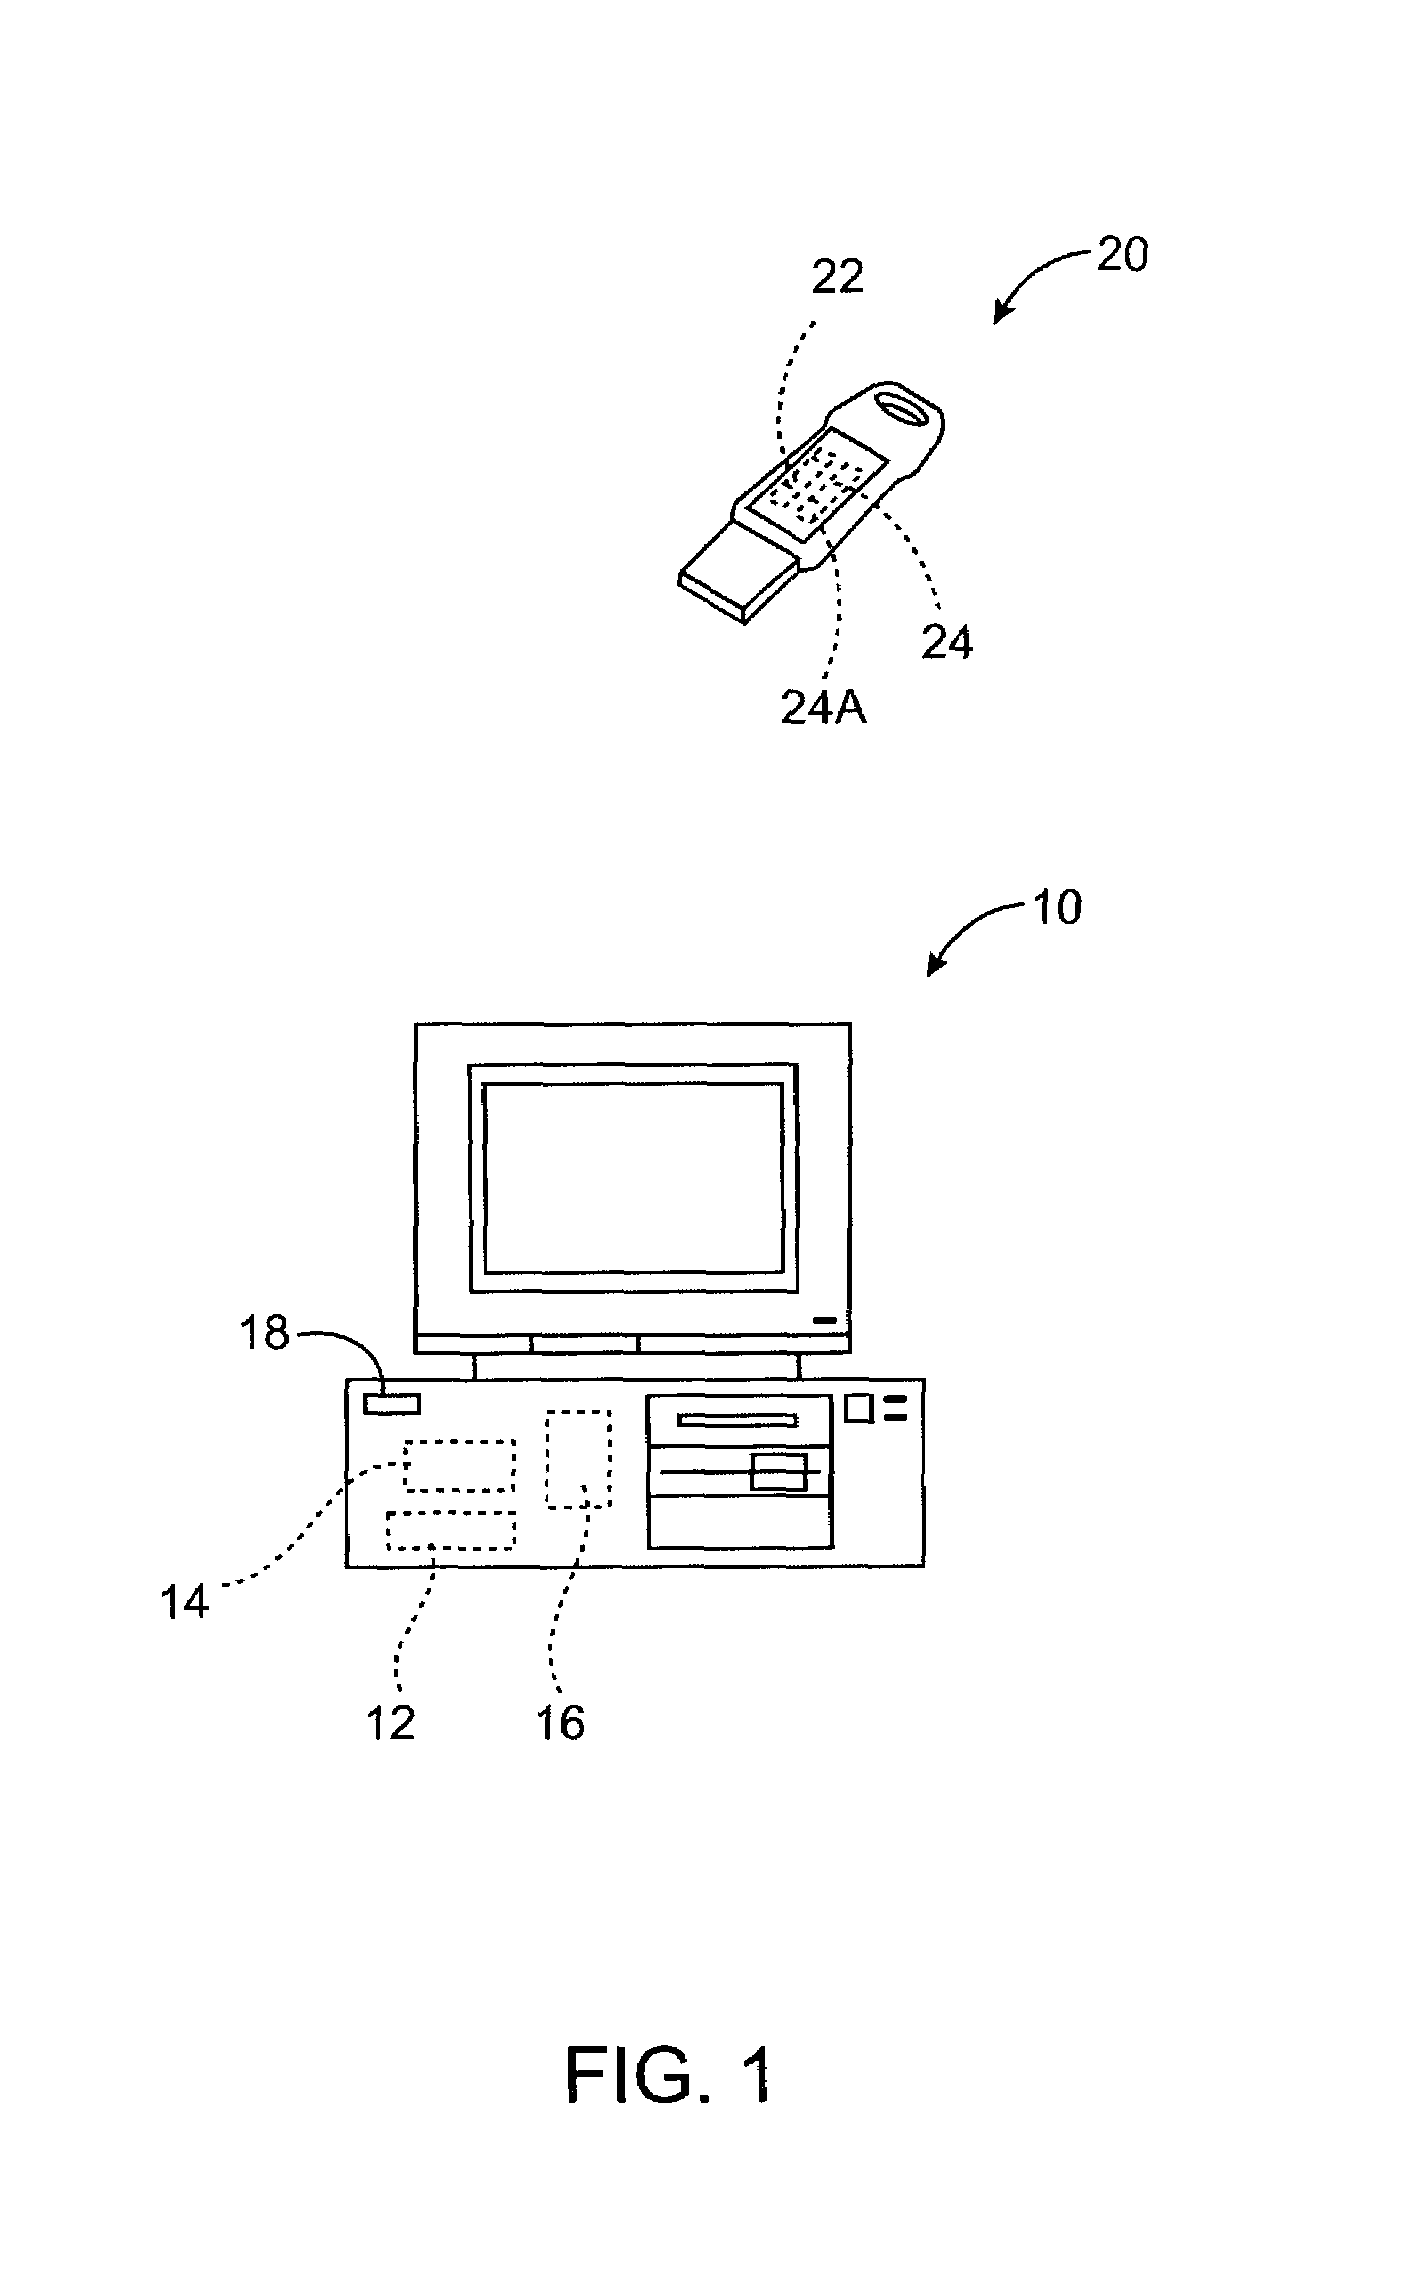 Method and system for controlling access to data stored on a data storage device